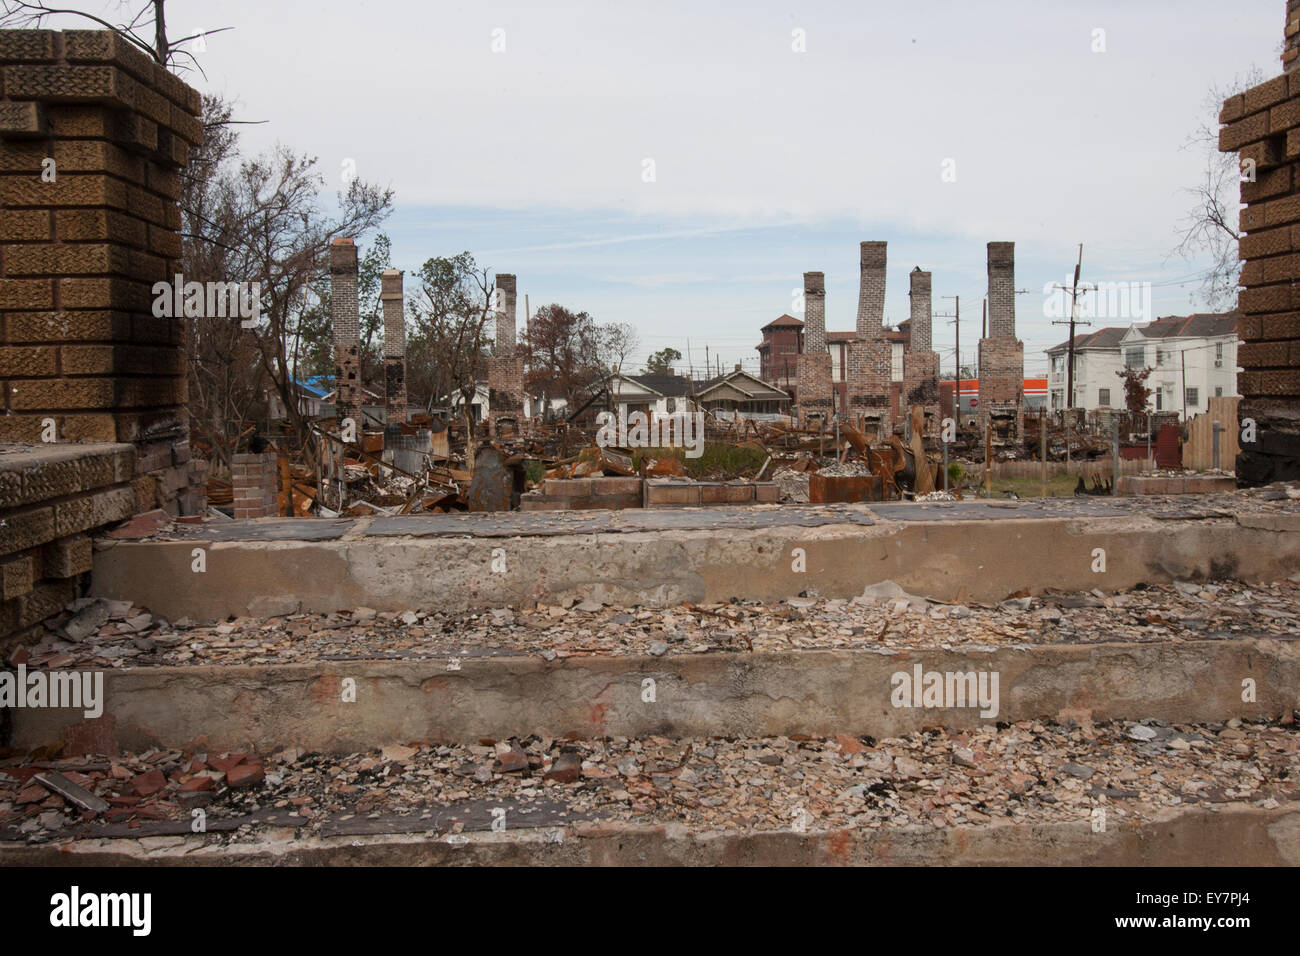 A view city block burned to the ground in the aftermath of Hurricane Katrina in New Orleans.  The chimneys and the slab are all that is left. Stock Photo